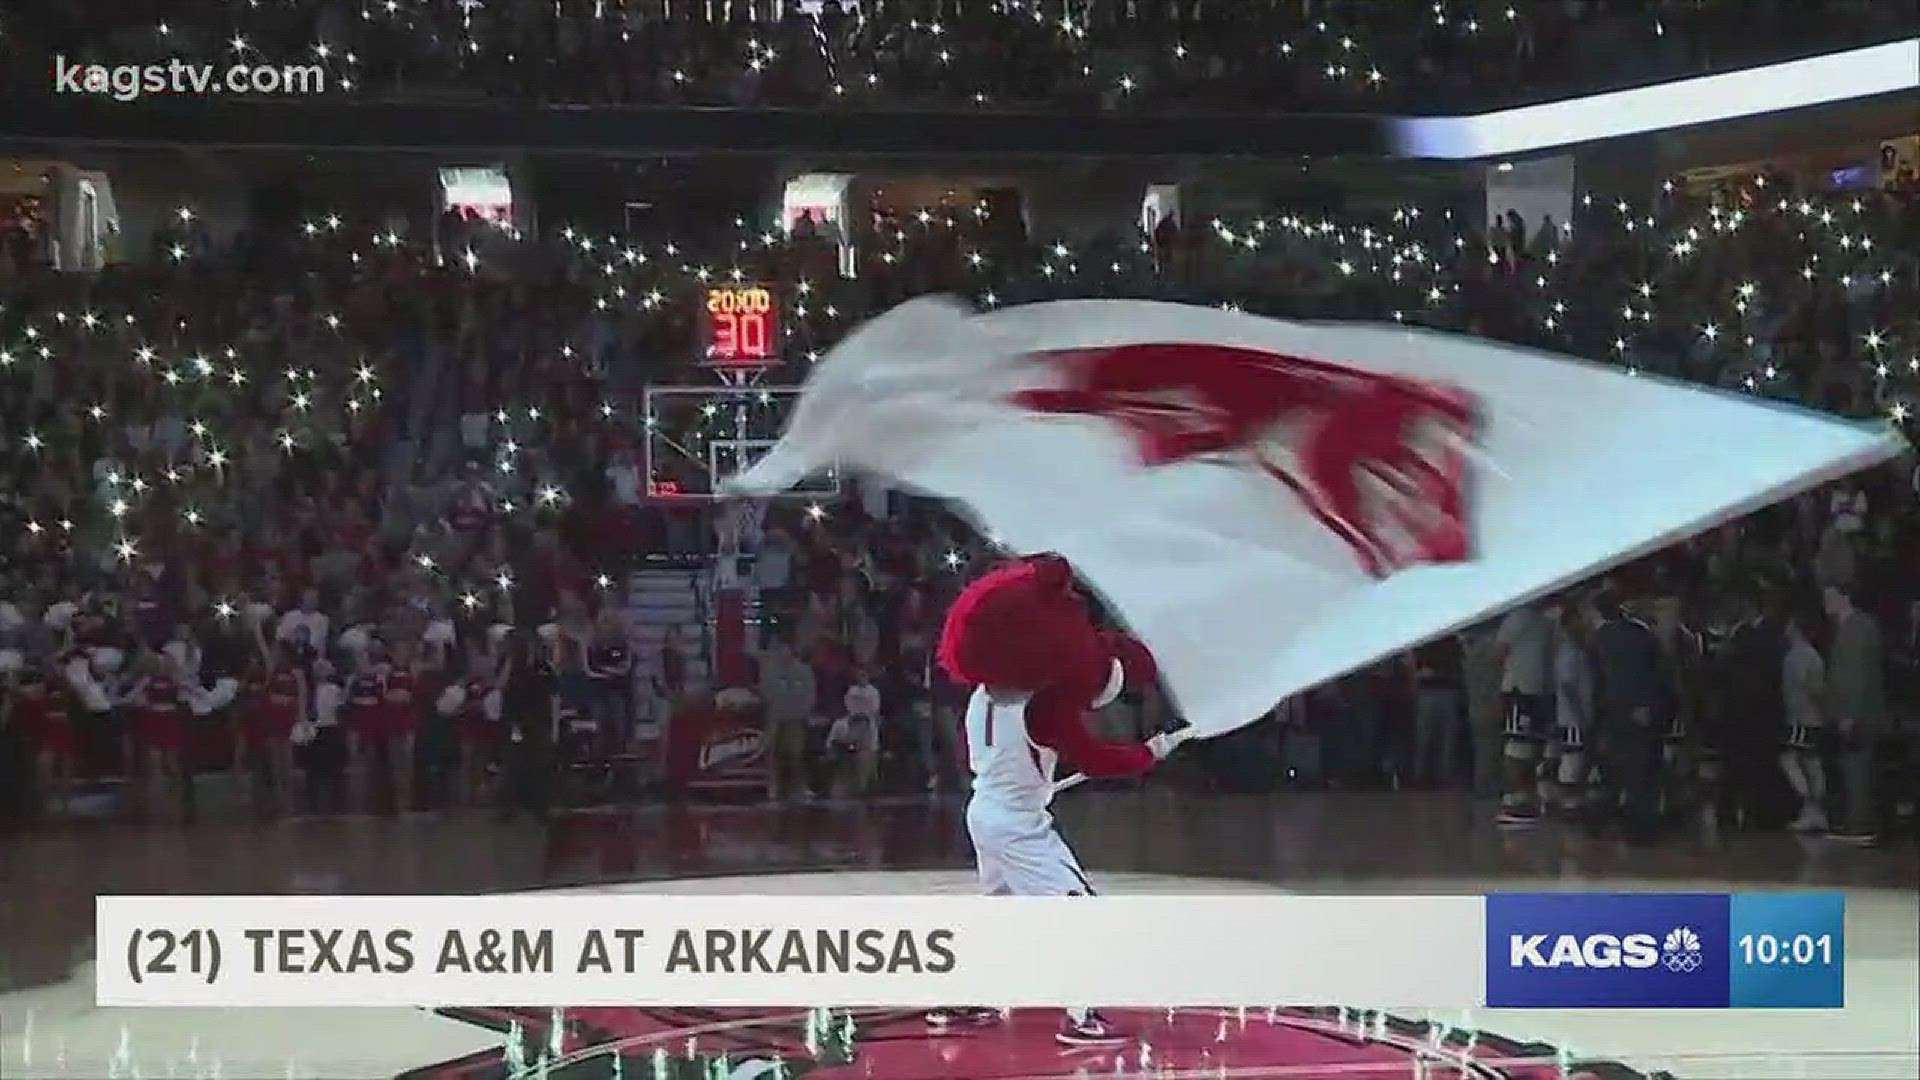 No. 21 Texas A&M lost its second game in a row 94-75 at Arkansas.